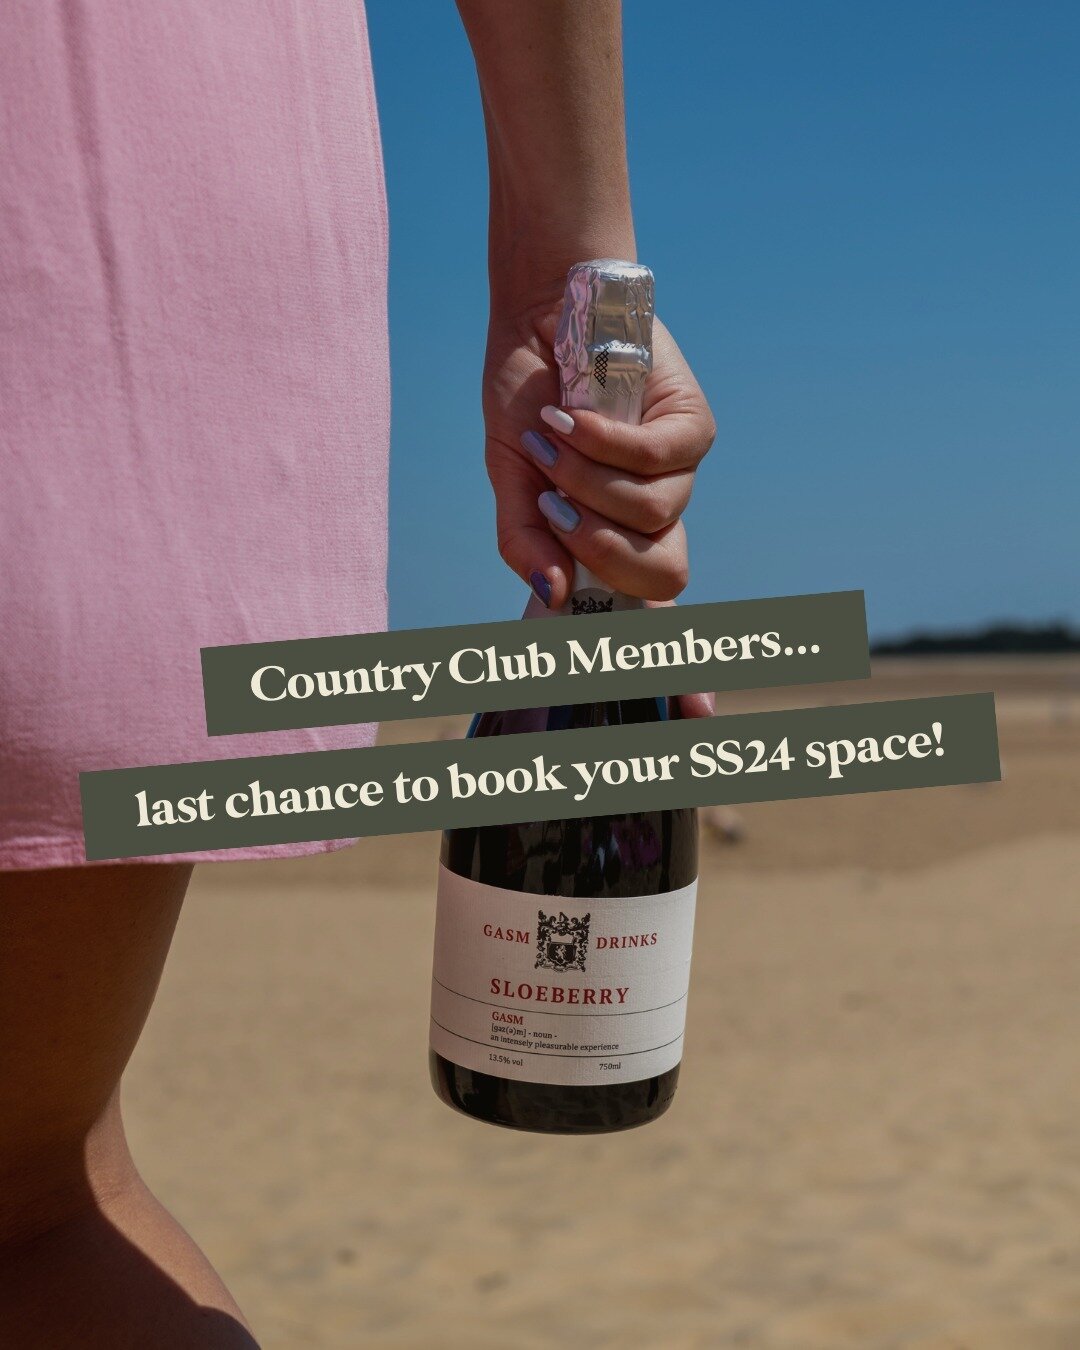 Calling all Country Club members! 📢⁠ This is your final call to secure your spot on our SS24 content days before we open up the remaining spaces to everyone else on 31st January! ⁠
⁠
Don't miss out &ndash; some of our events are filling up fast! 🌟?